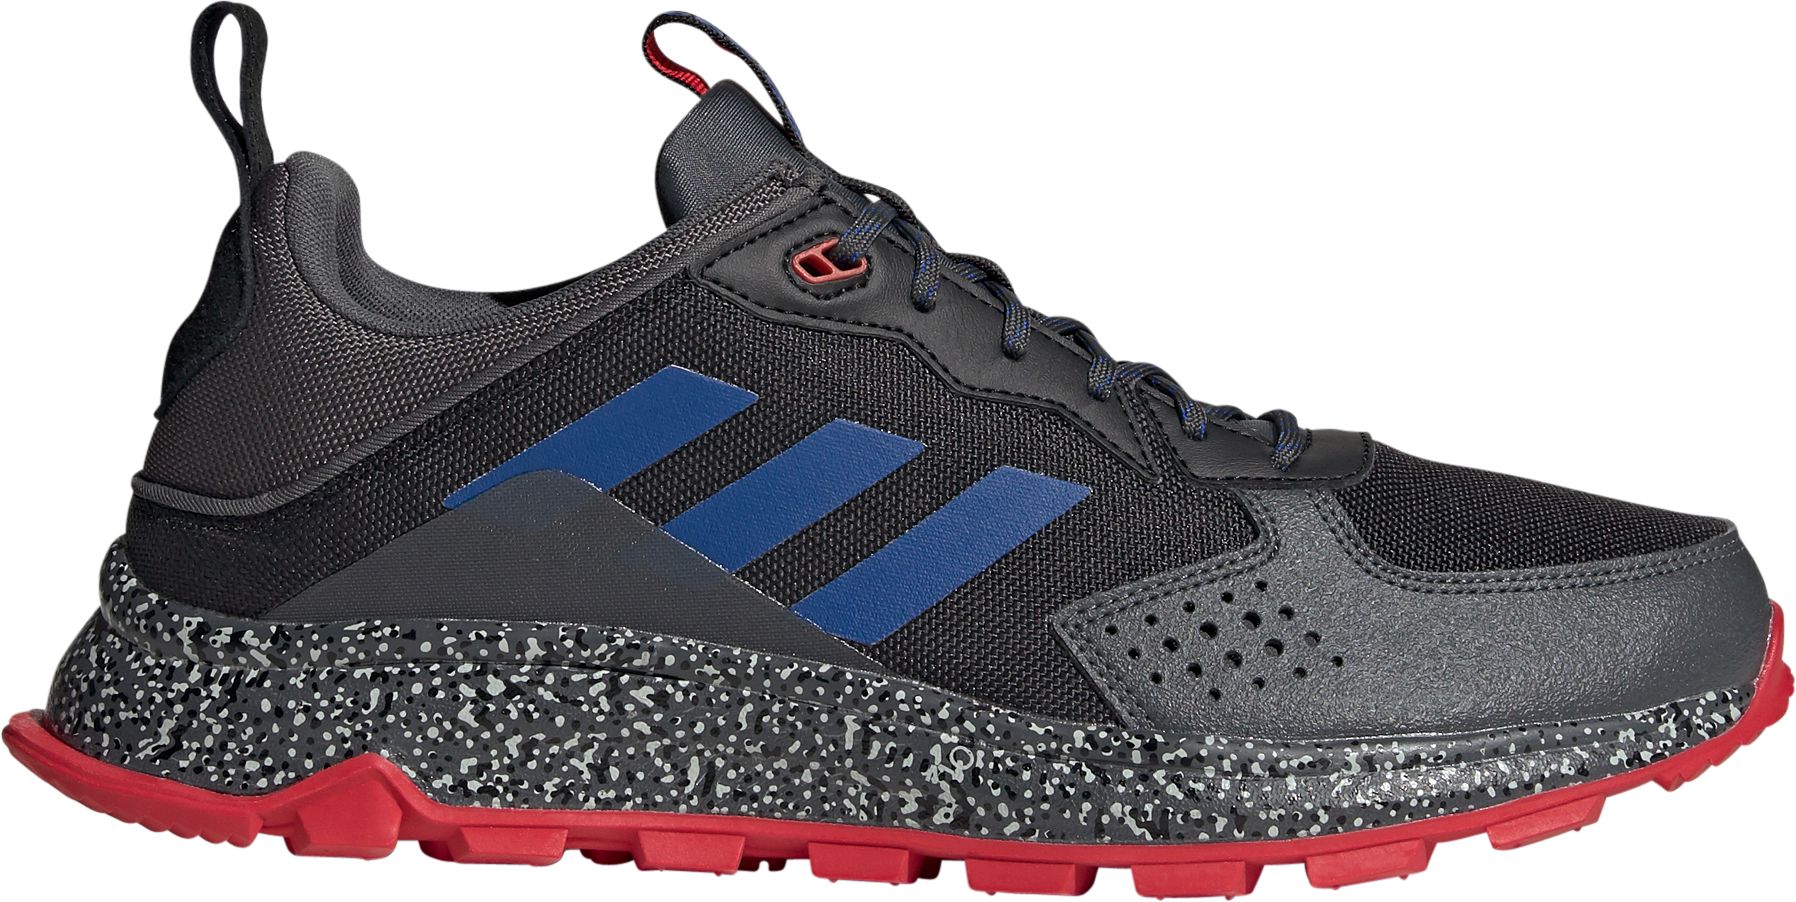 adidas Men's Response Trail Trail Running Shoes | DICK'S Sporting Goods